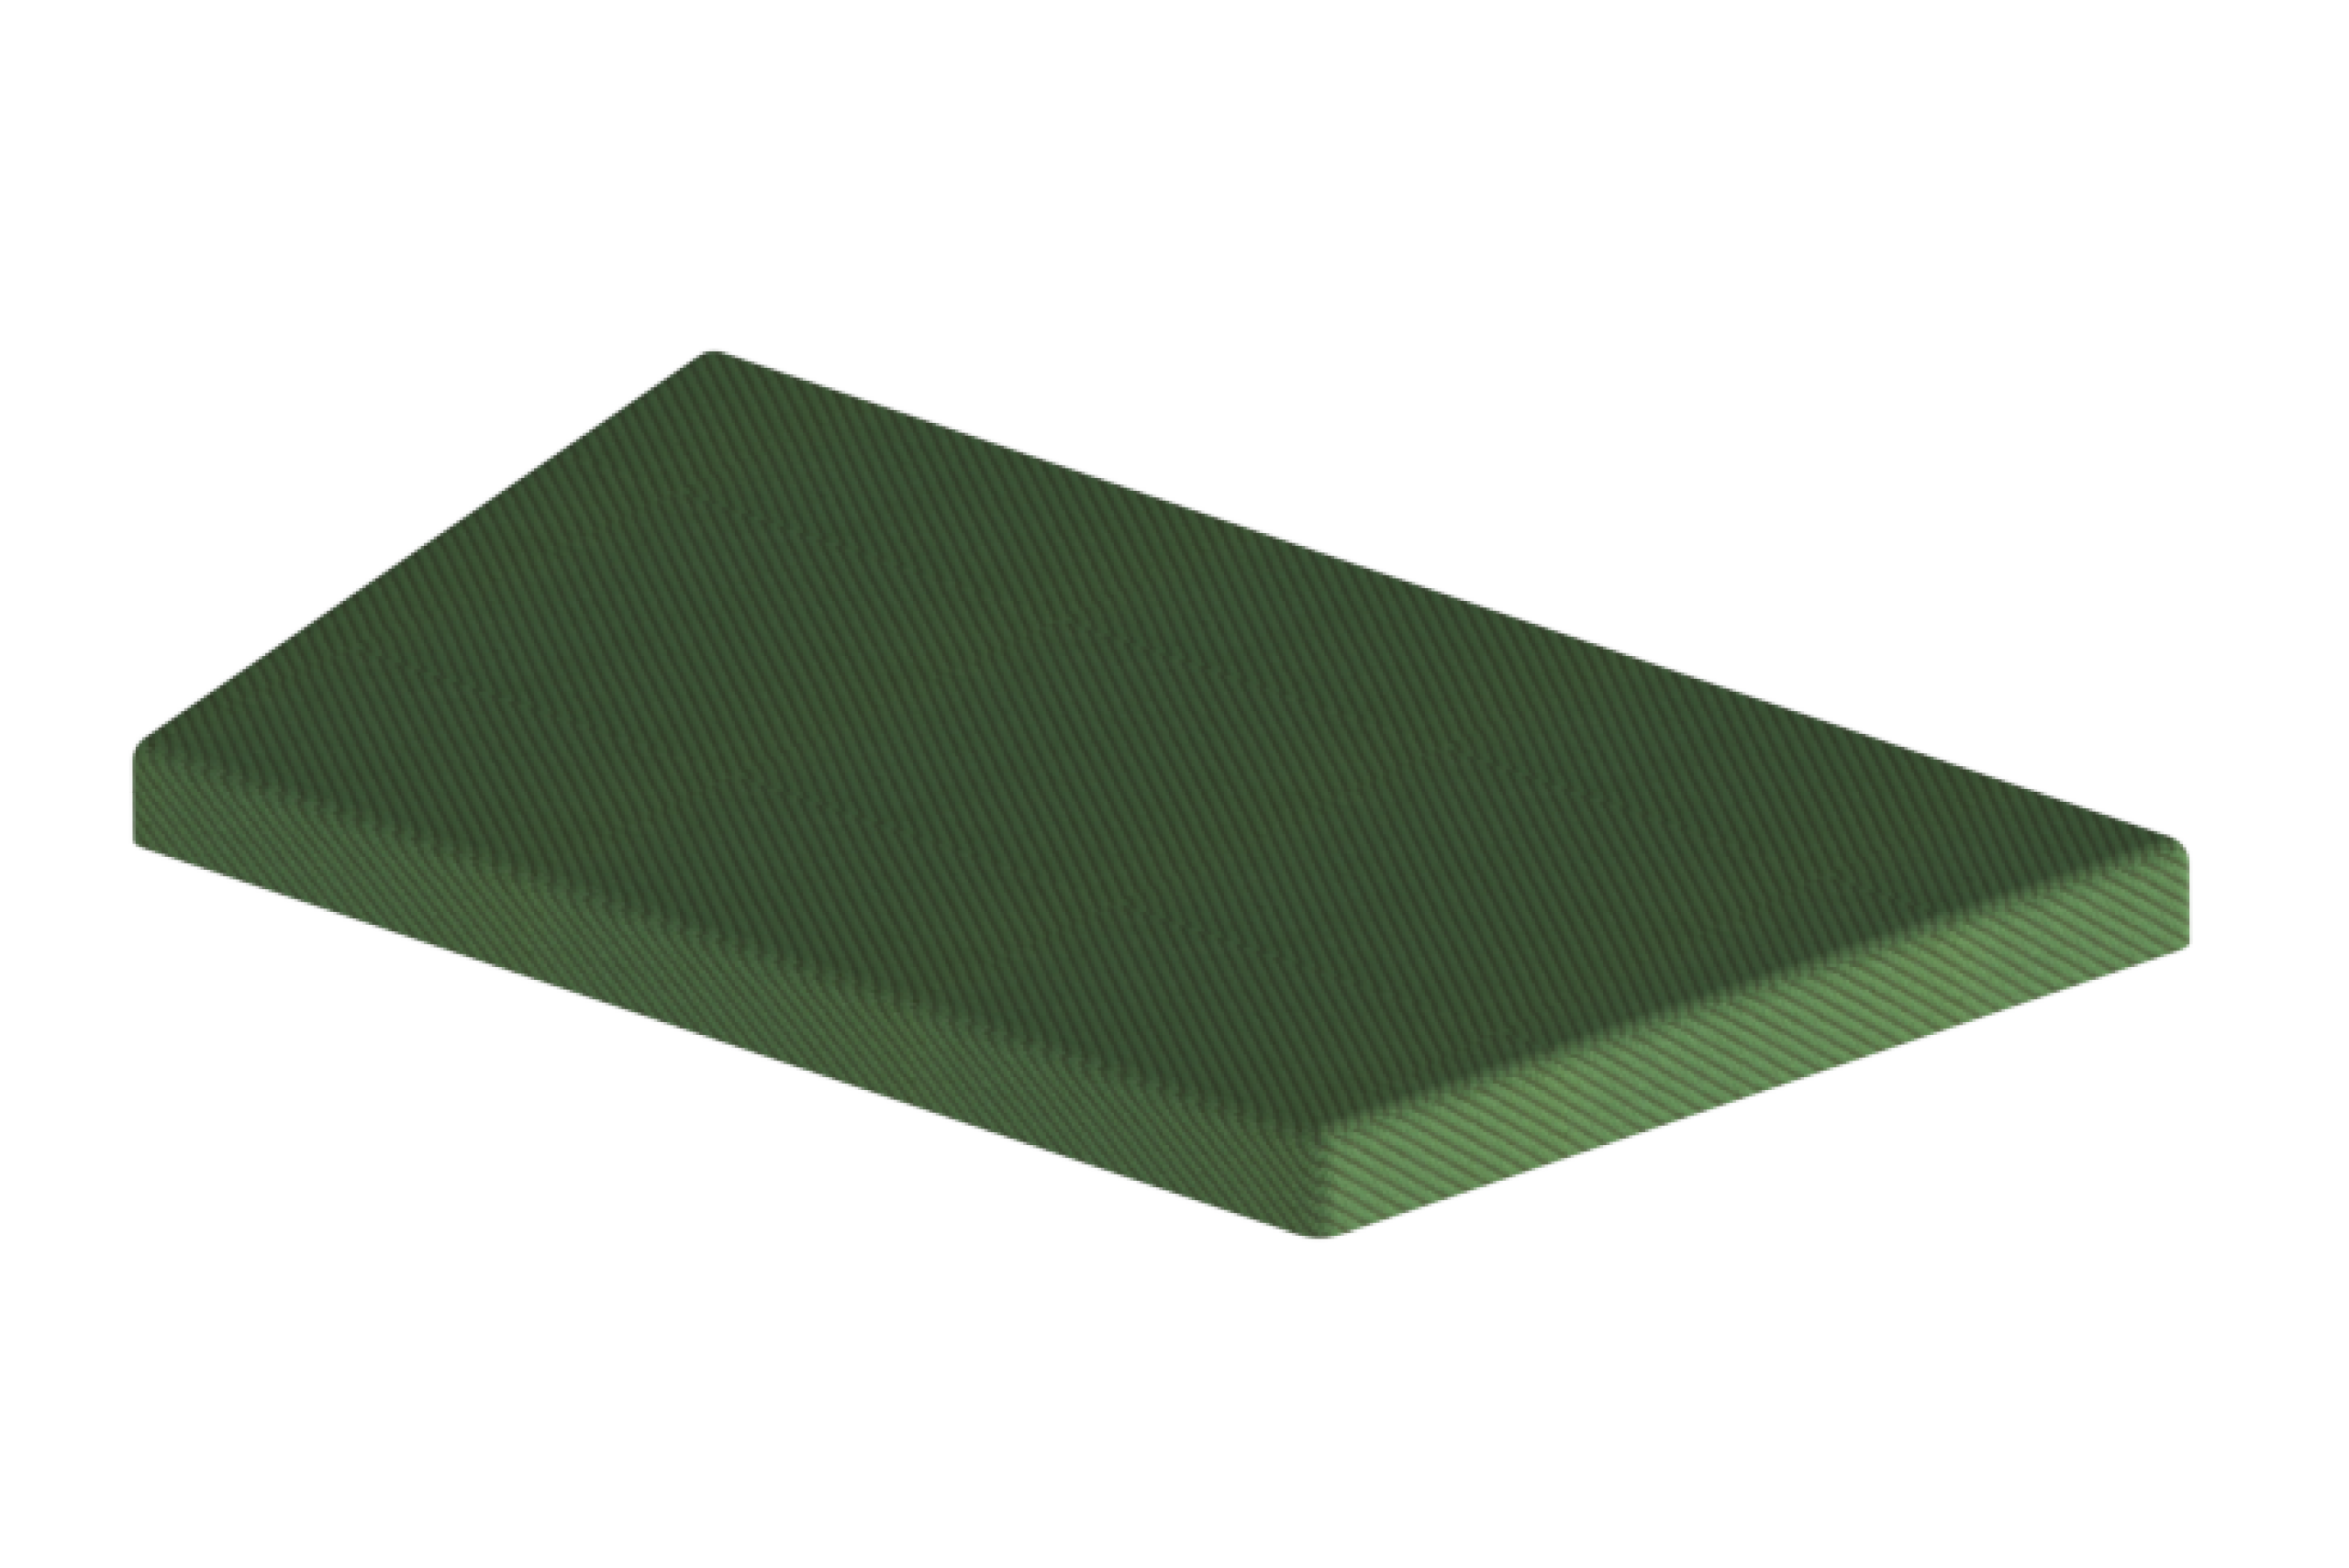 Workagile Huddlebox Camp front seat pad module shown in green